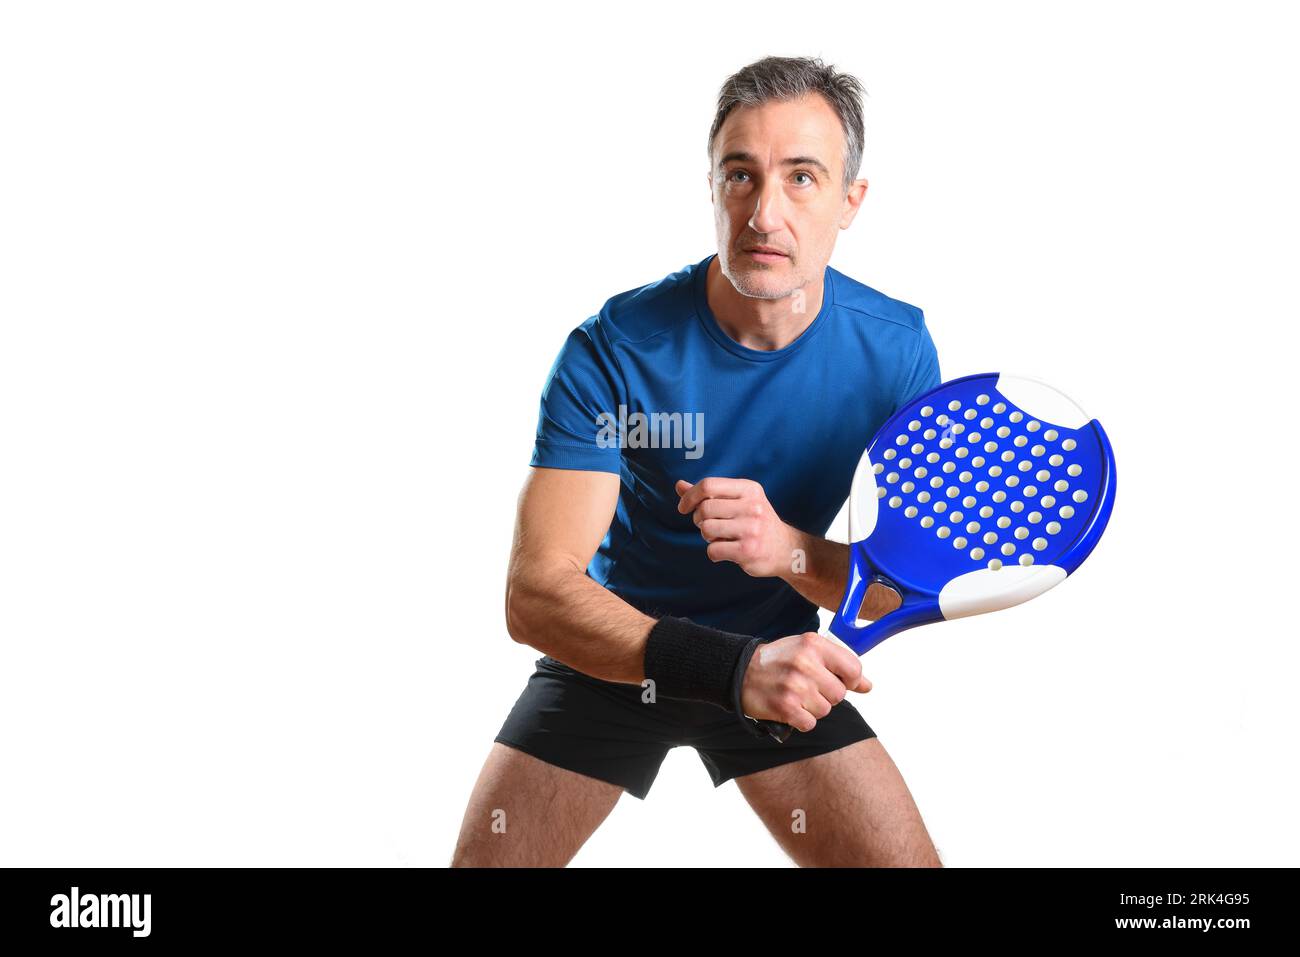 Portrait of man playing padel tennis in position to hit a backhand ball wearing blue and black sports outfit and white isolated background. Front view Stock Photo